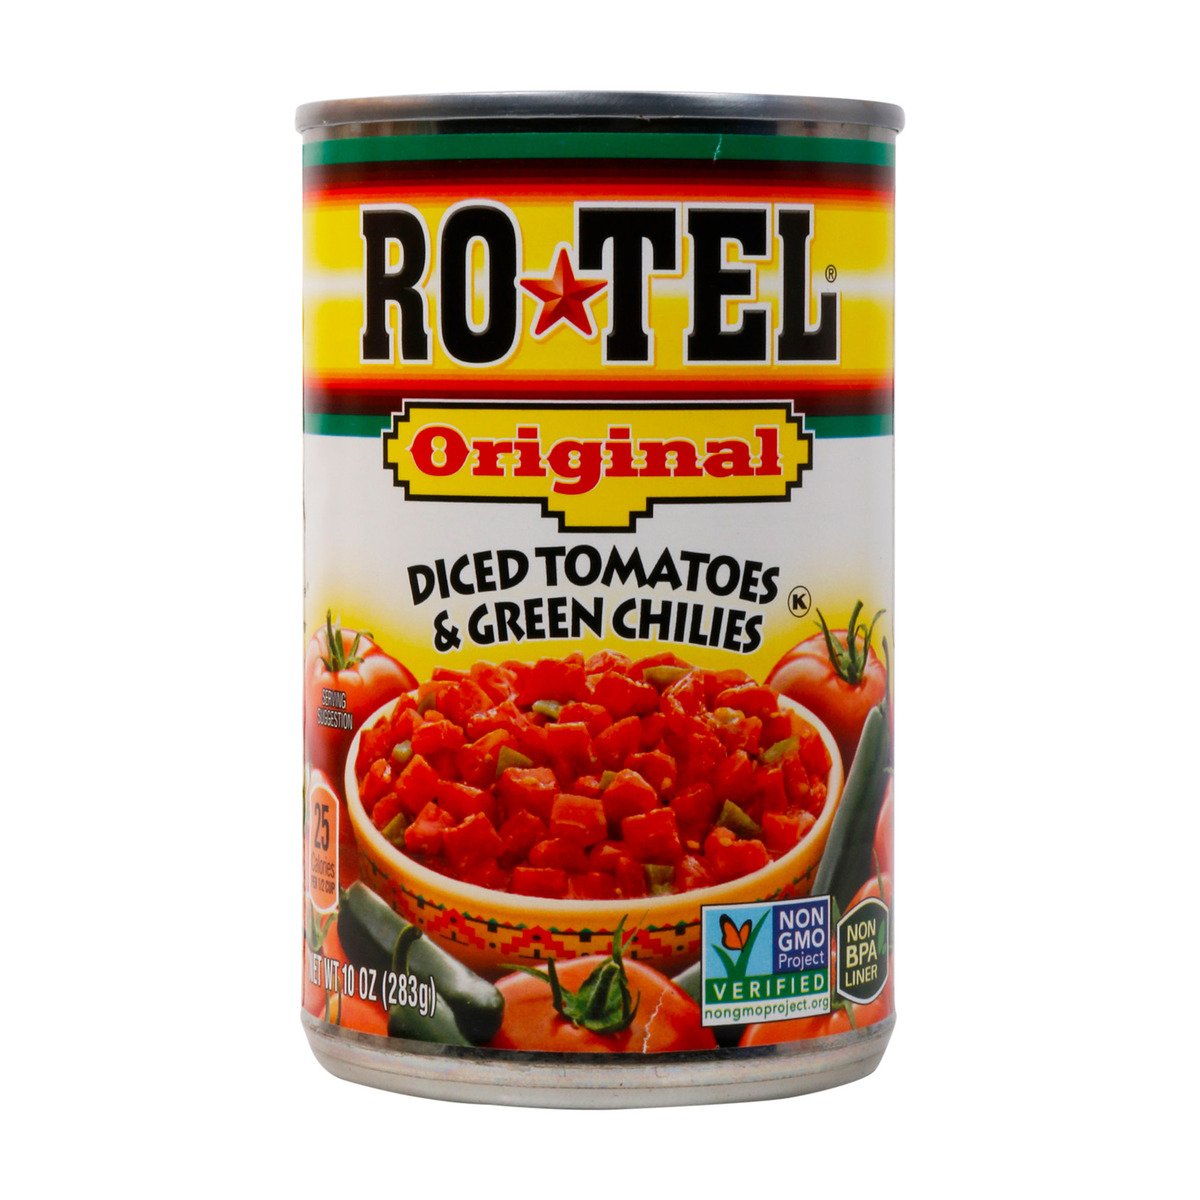 Ro-tel Original Diced Tomatoes And Green Chilies 283g